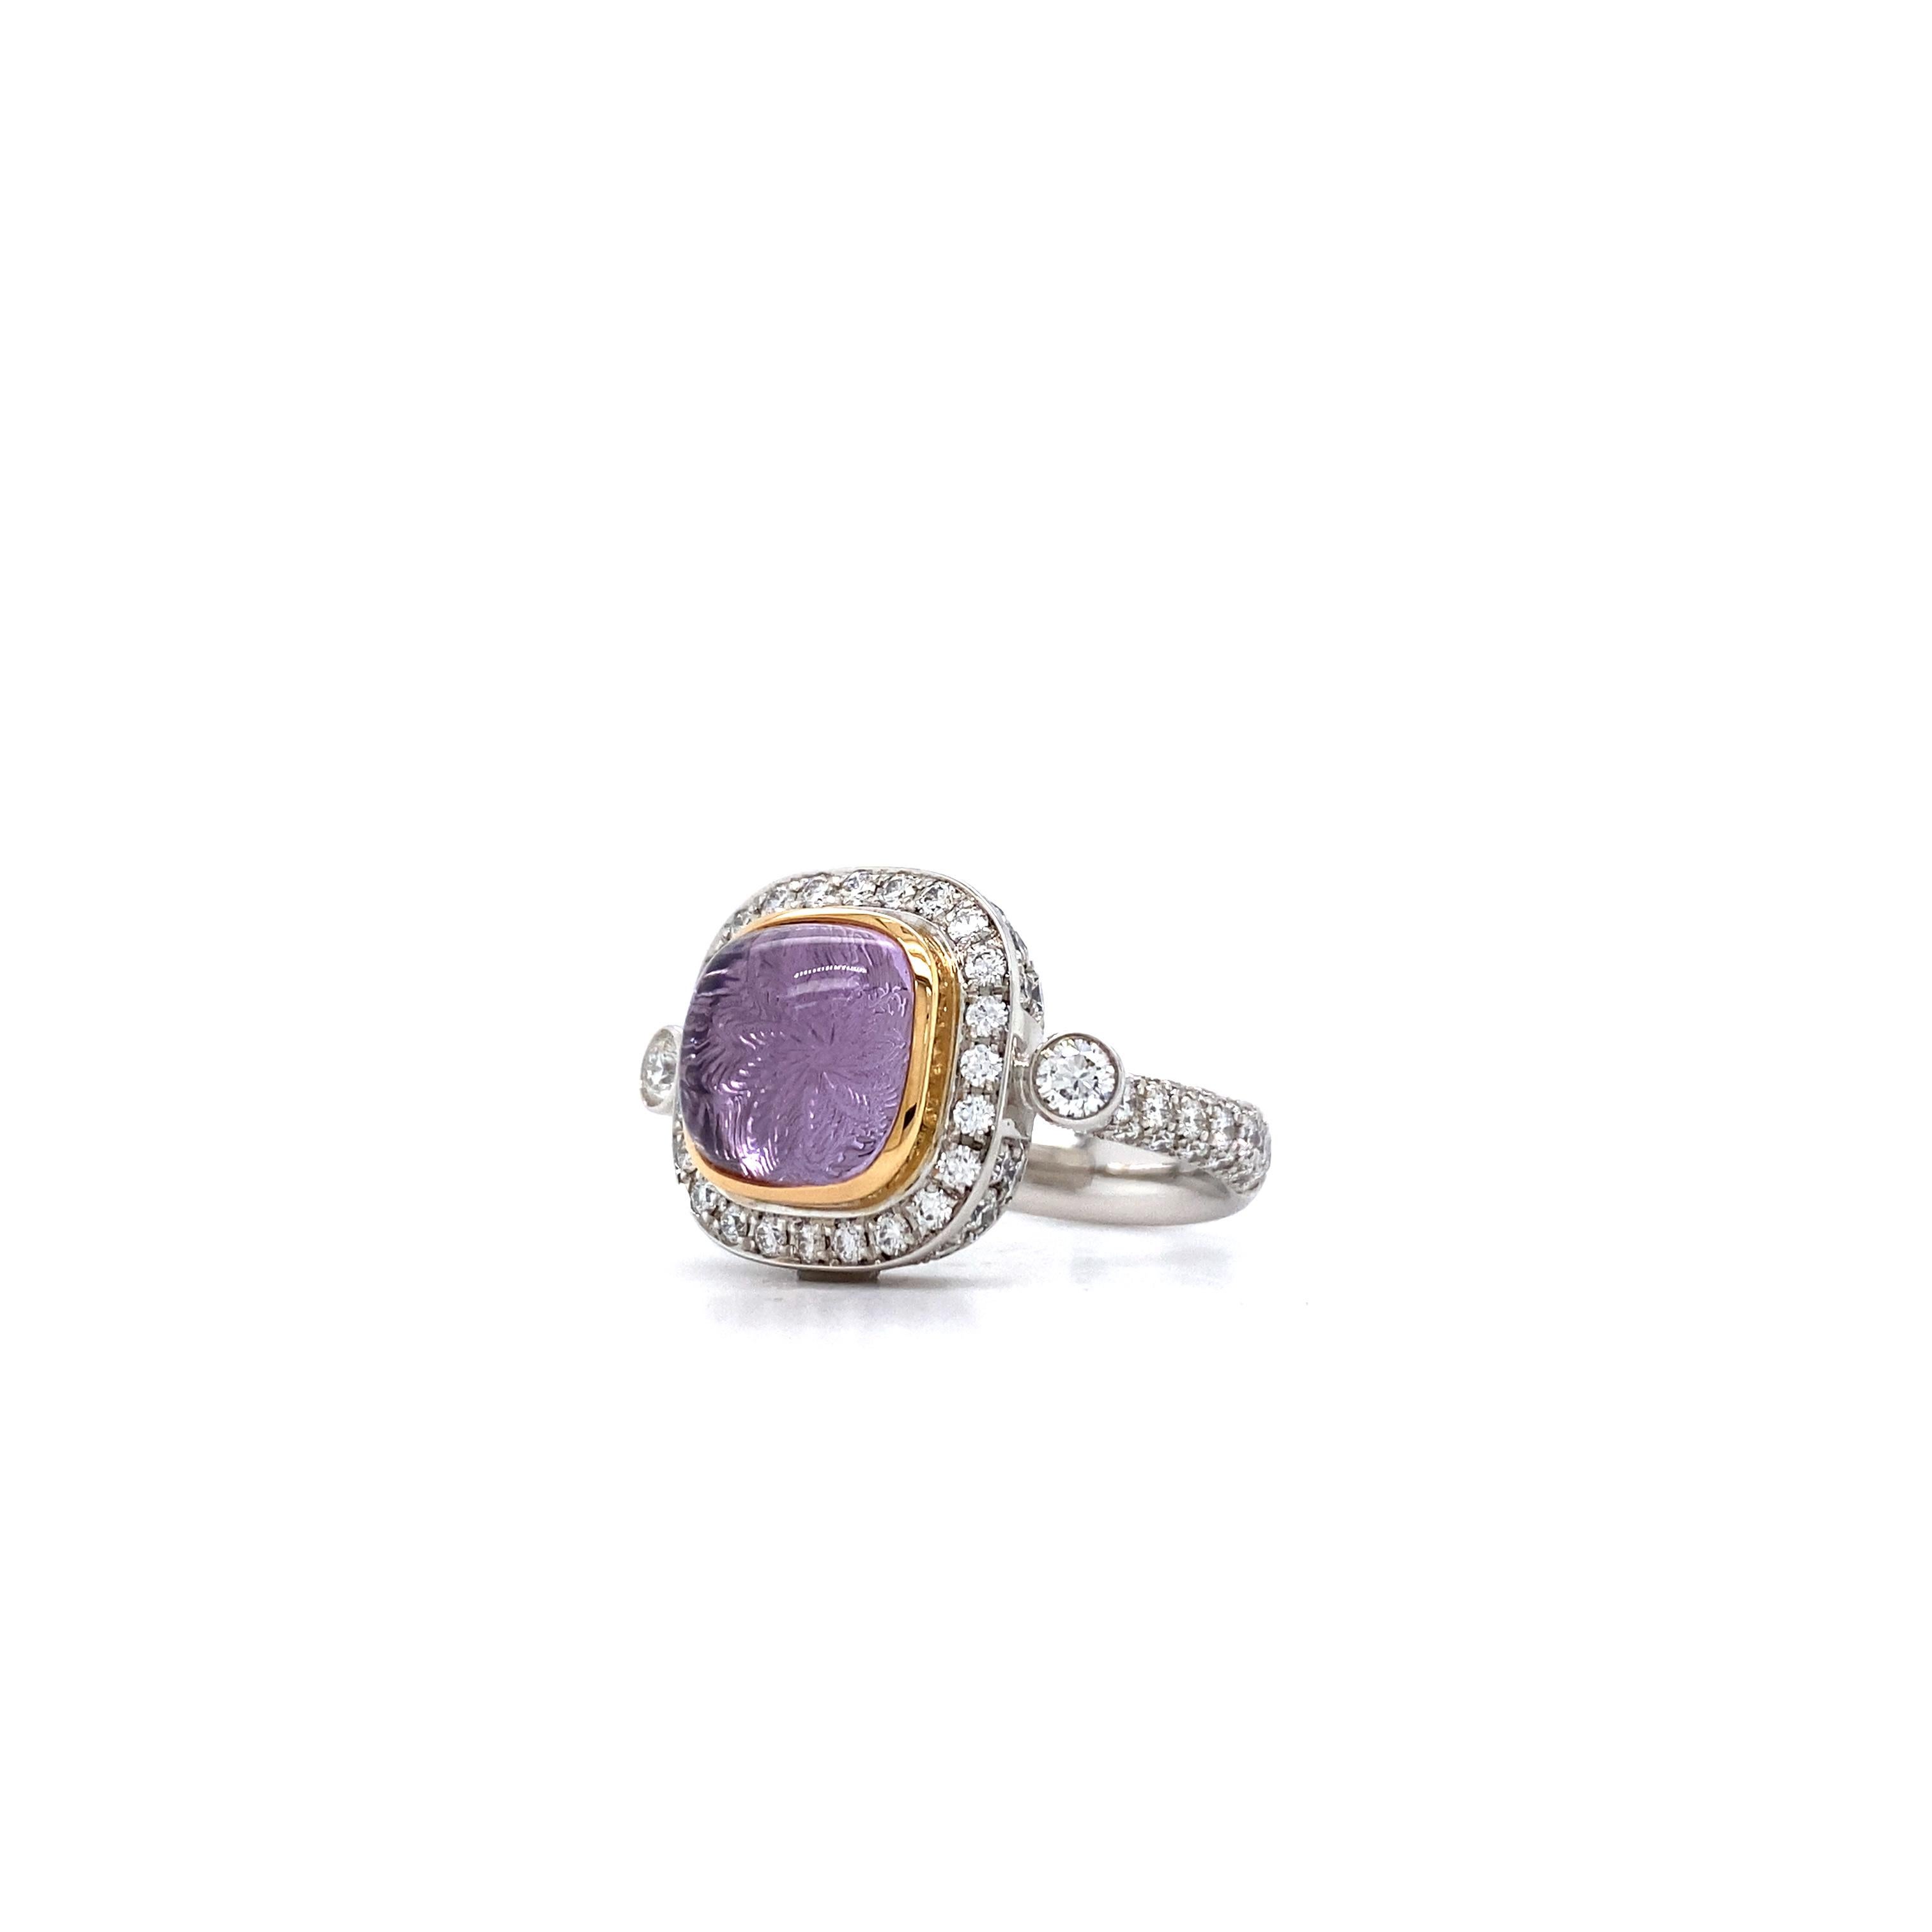 Victor Mayer Era Amethyst Ring 18k White Gold/Rose Gold with 120 Diamonds For Sale 5